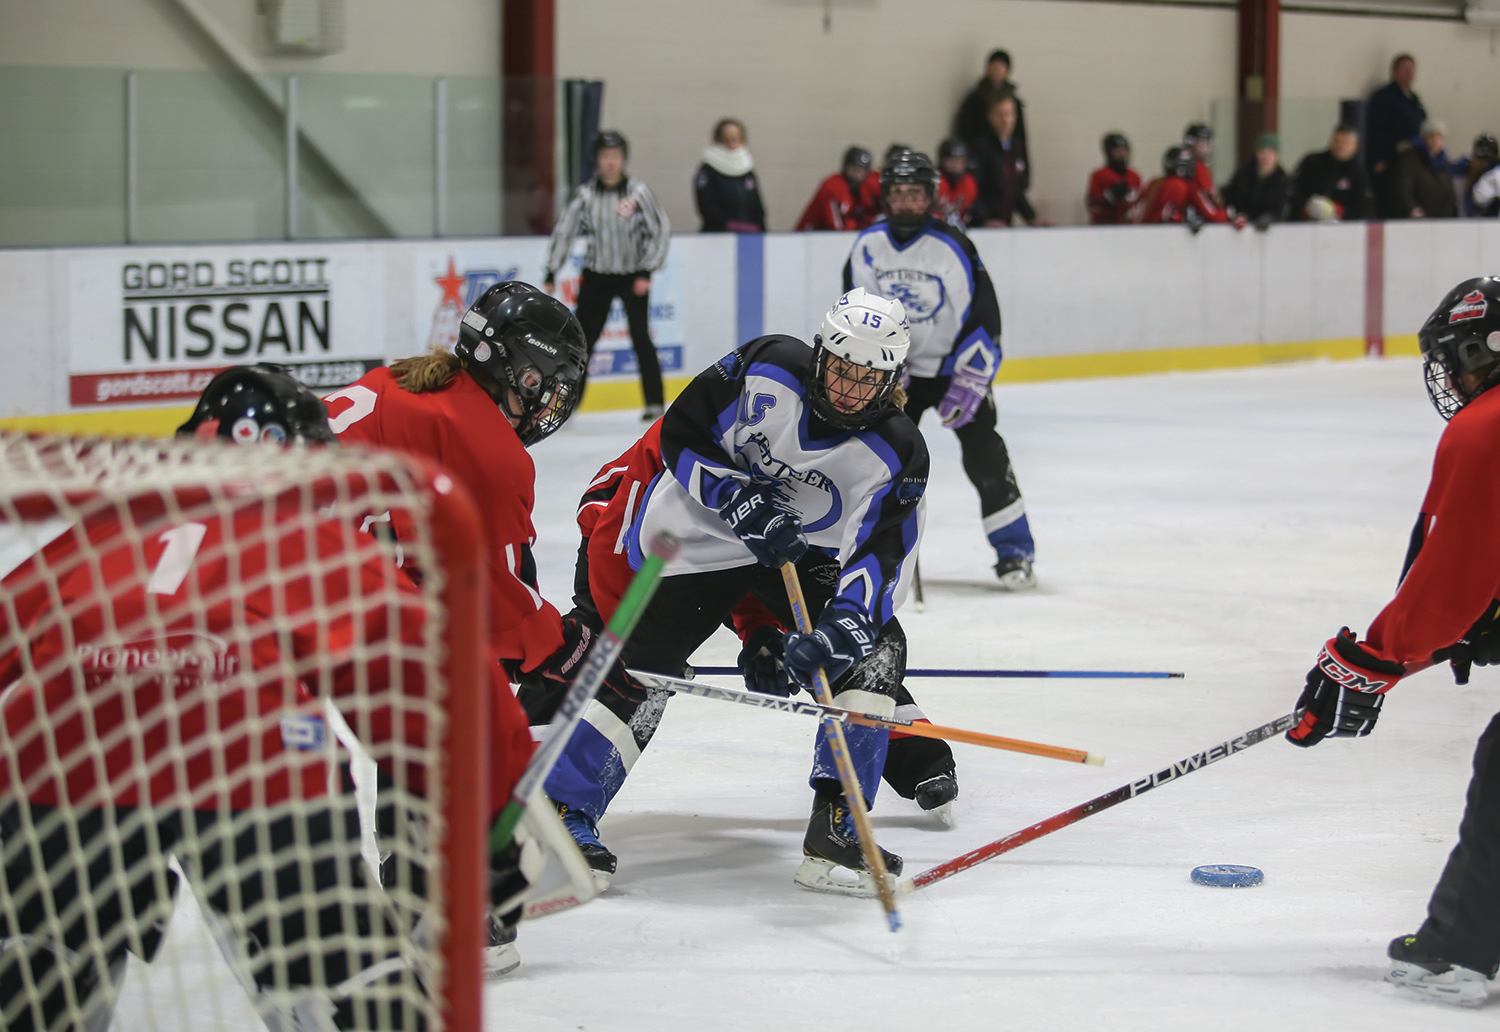 QUICK MOVES - Alexa Swenson of the U14A Red Deer Riot tried to get past members of the Strathmore Fire & Ice during round robin play at the 33rd Annual Red Deer Friends on Ice Tournament at the Kinsmen Community Arenas last weekend.